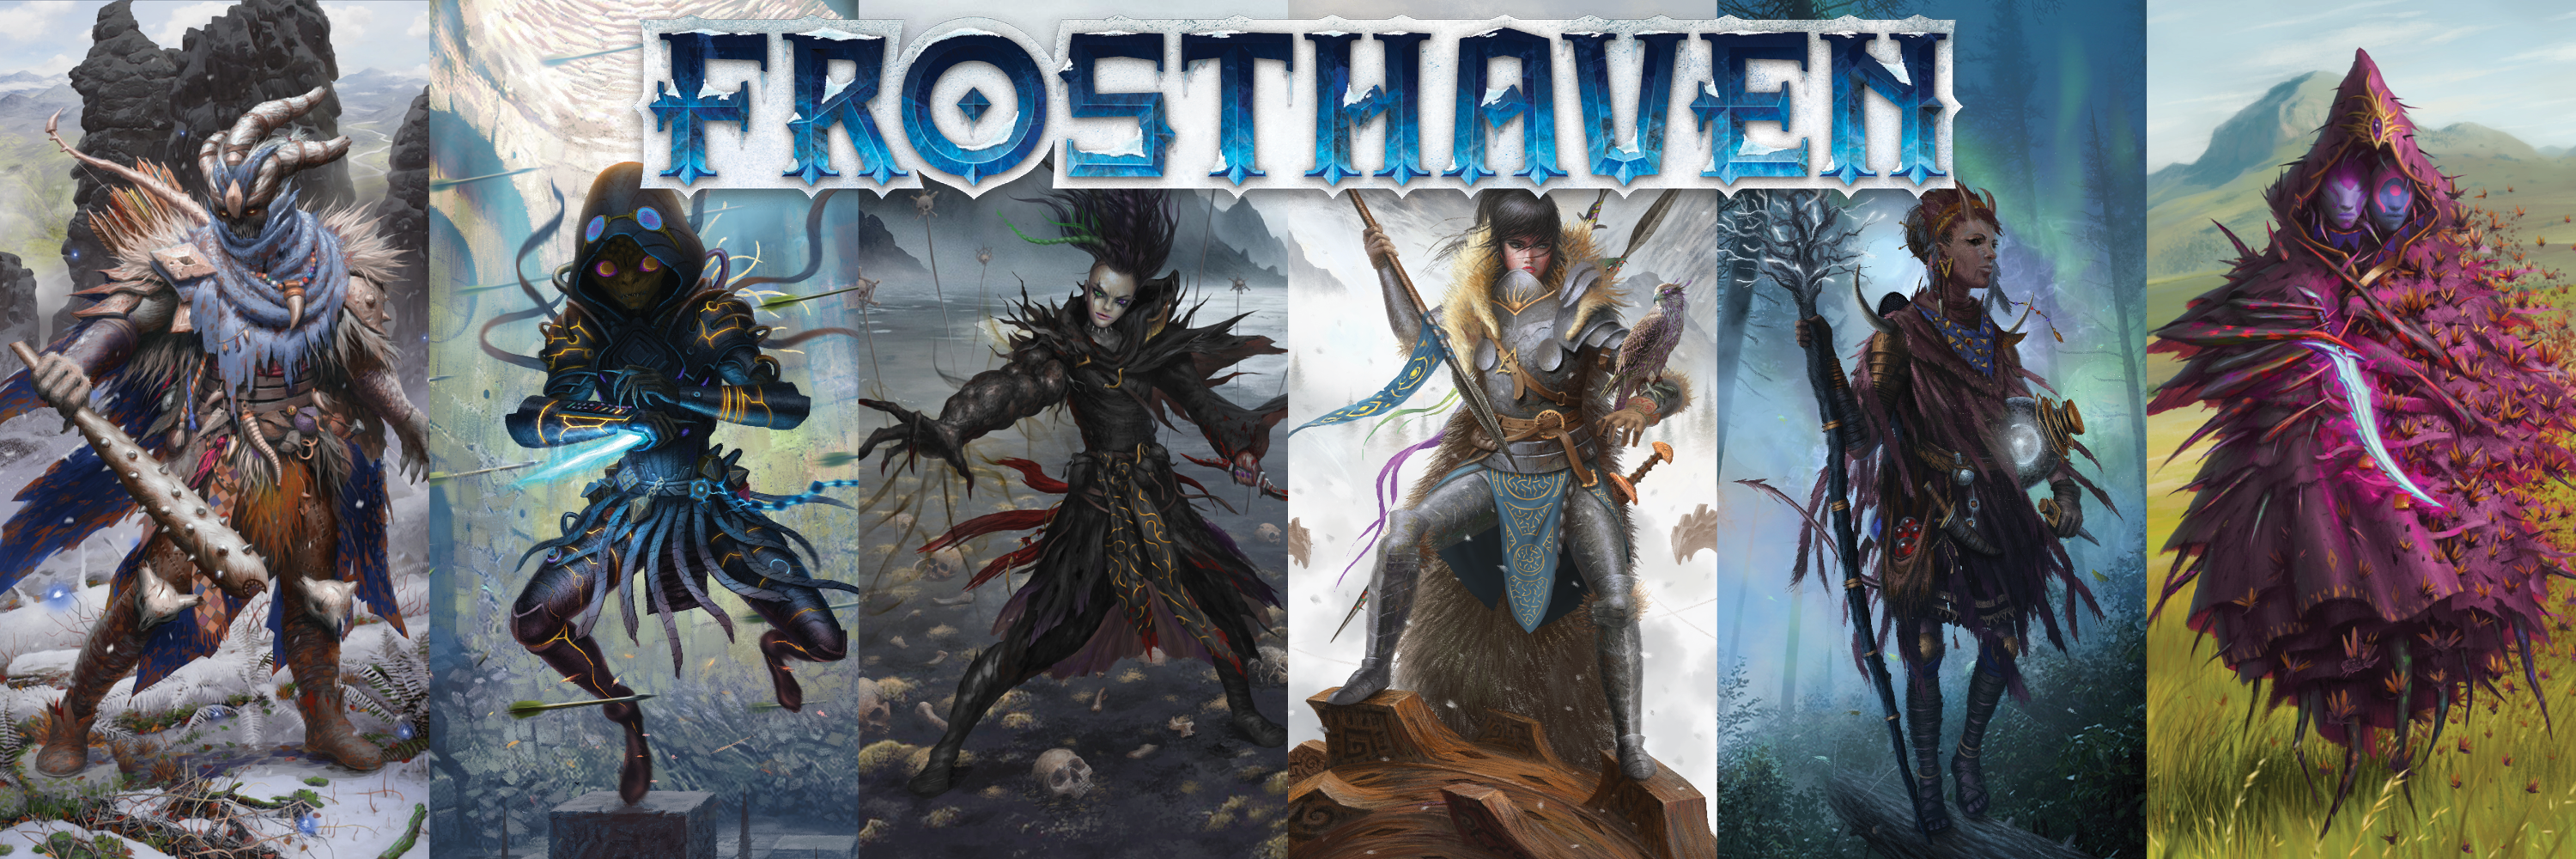 Frosthaven Characters Display, Left to Right: Drifter, Blinkblade, Necromancer, Bannerspear, Deathwalker, Geminate